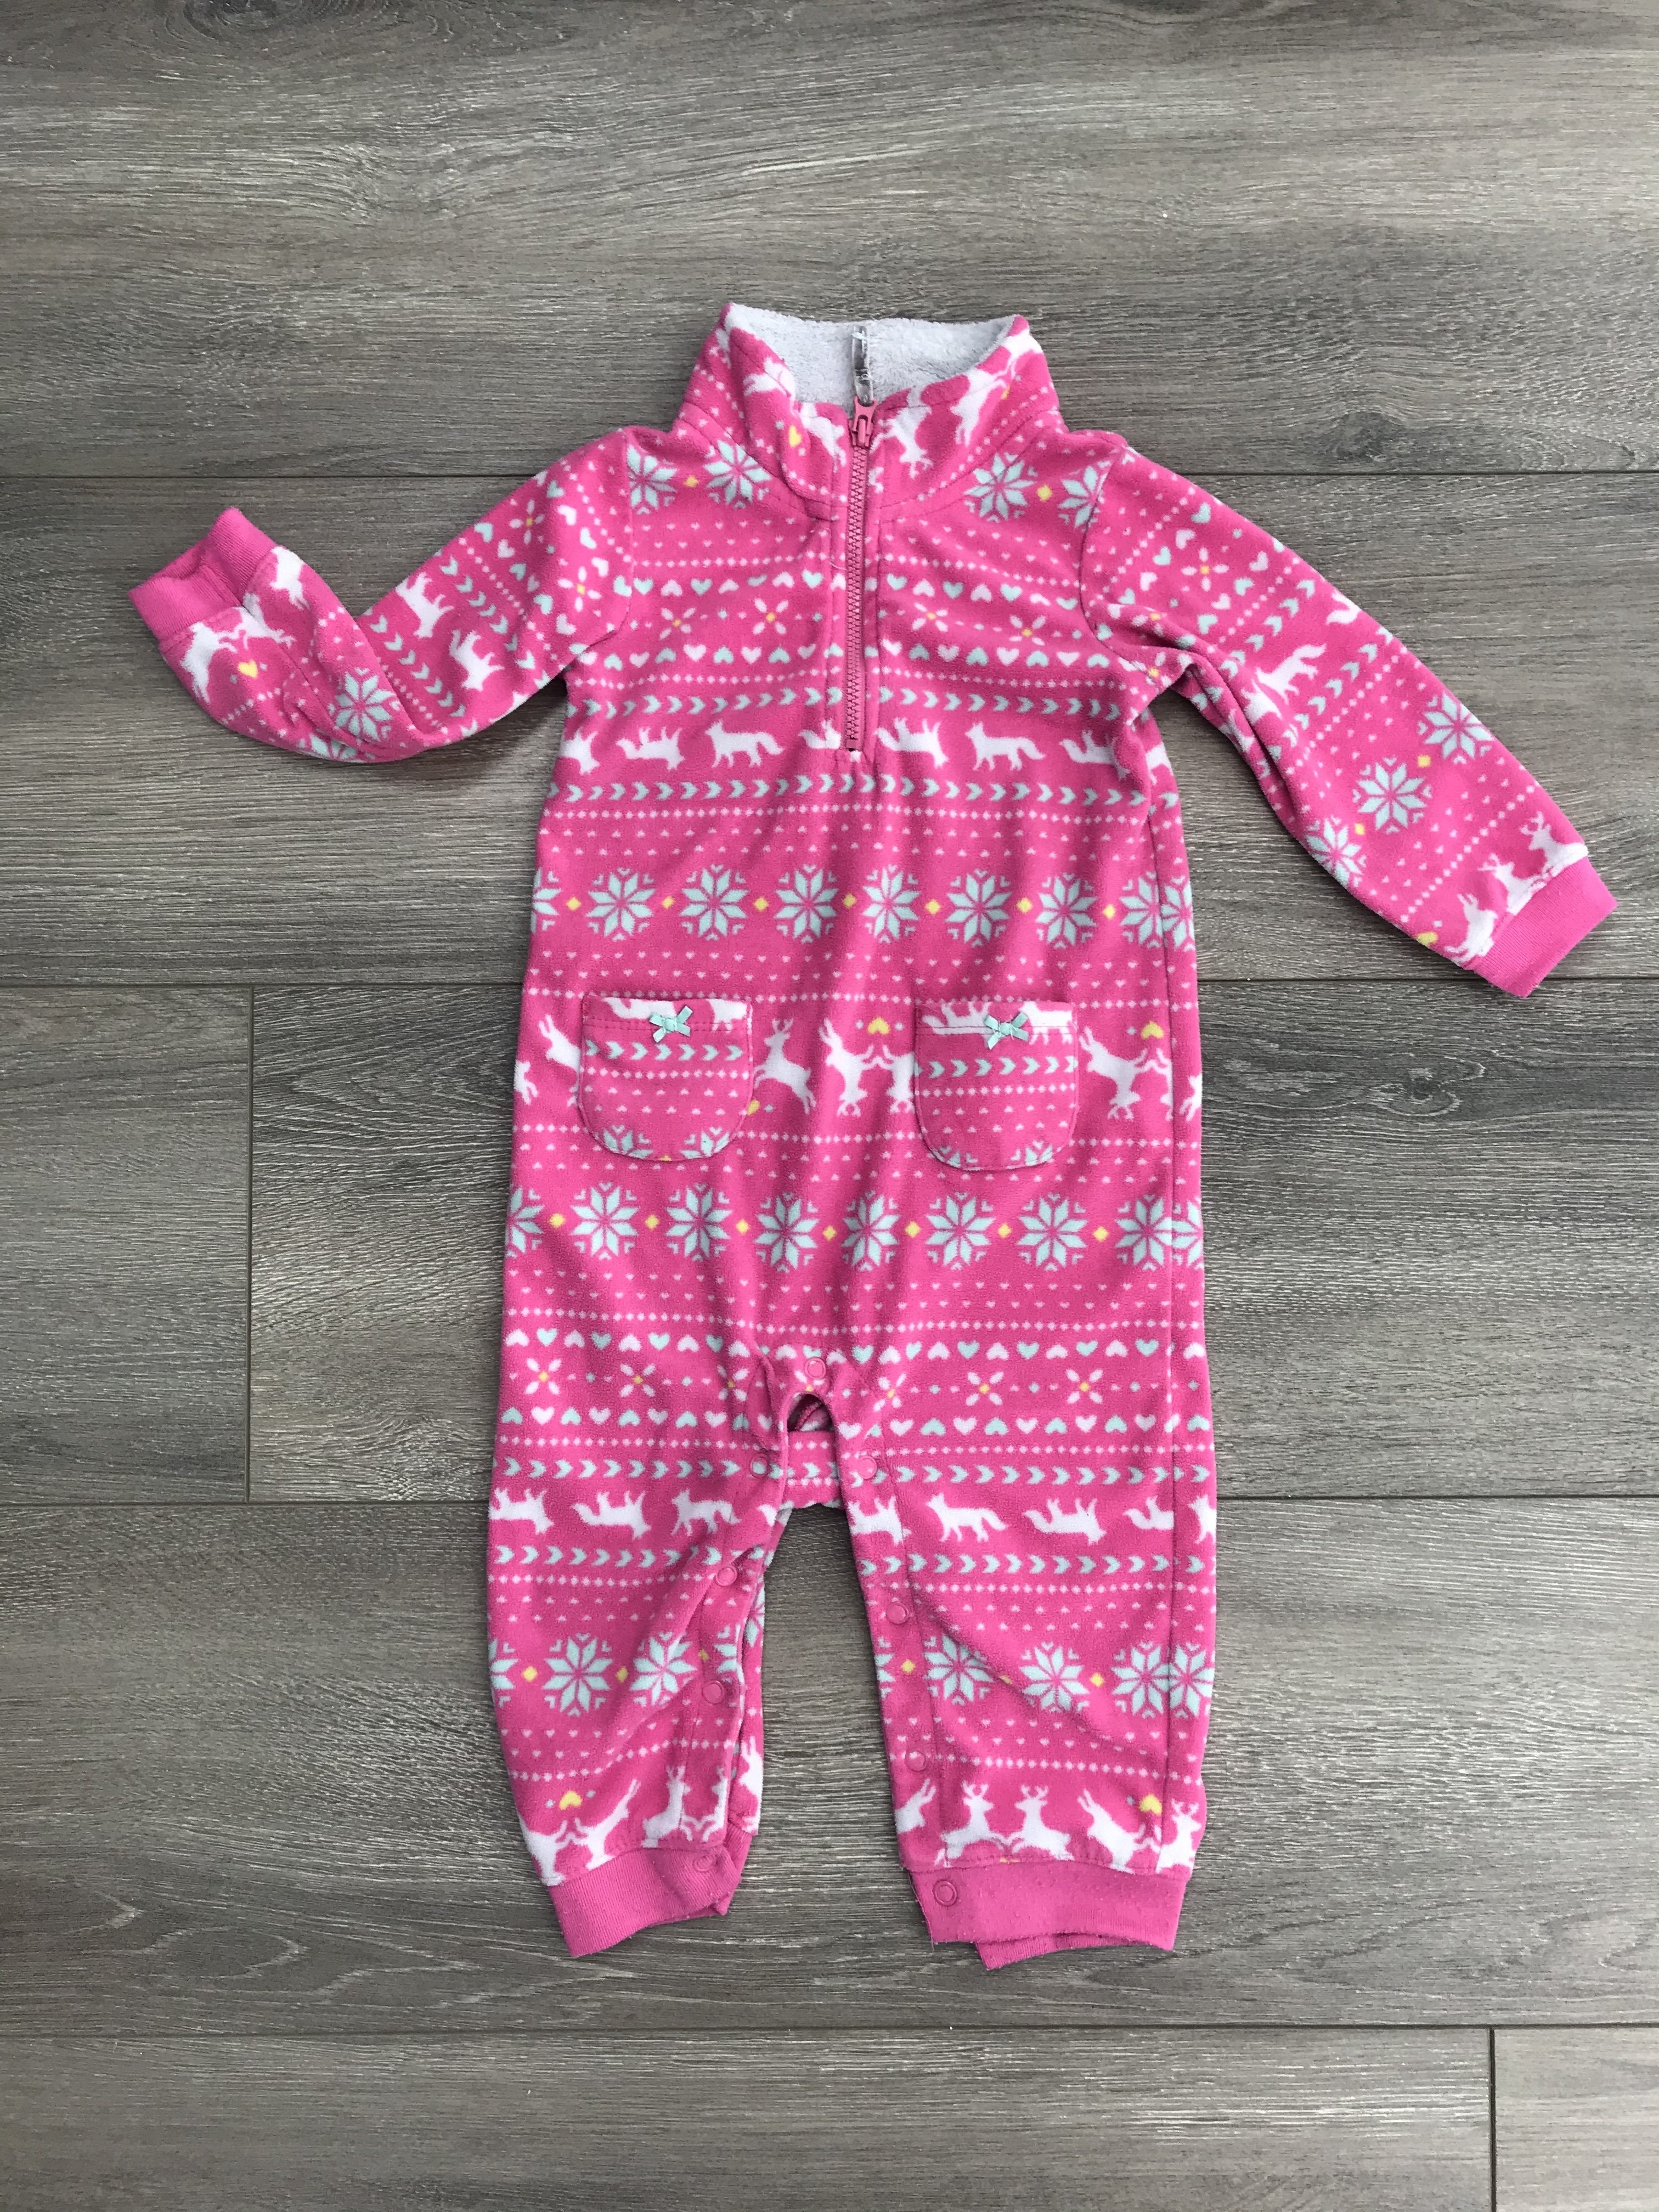 Carters 12 Months Warm One-piece, Warm and soft one piece with two cute pockets in the front that the baby probably won't use., Pink, 100% Polyester, 12 months baby's one-piece, baby's clothes, 12 months baby clothes, baby girl's clothes